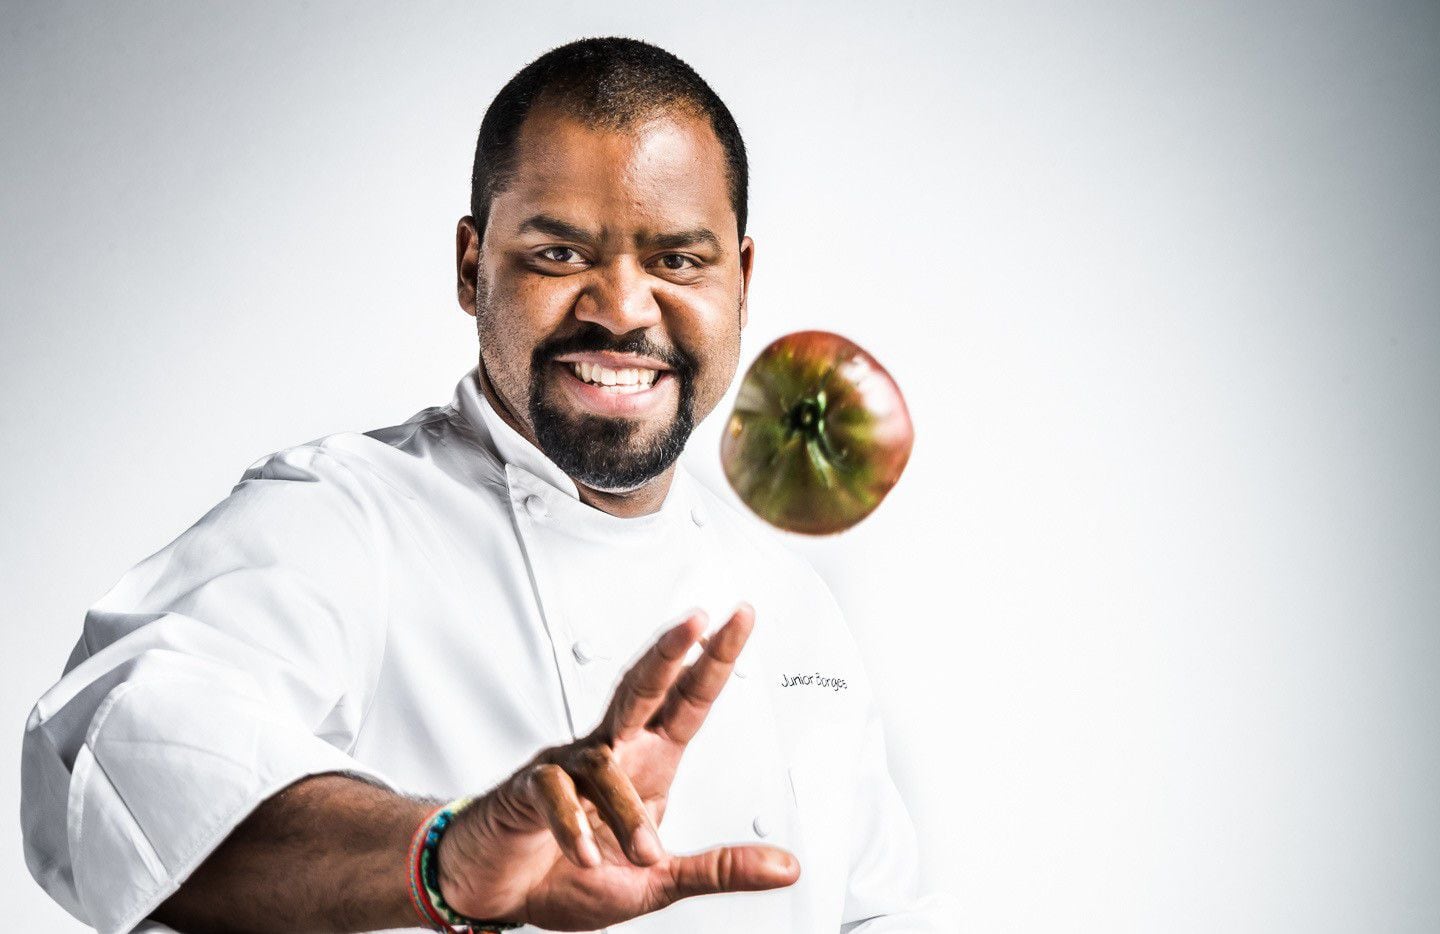 Nilton "Junior" Borges has been named executive chef and vice president of culinary for a...